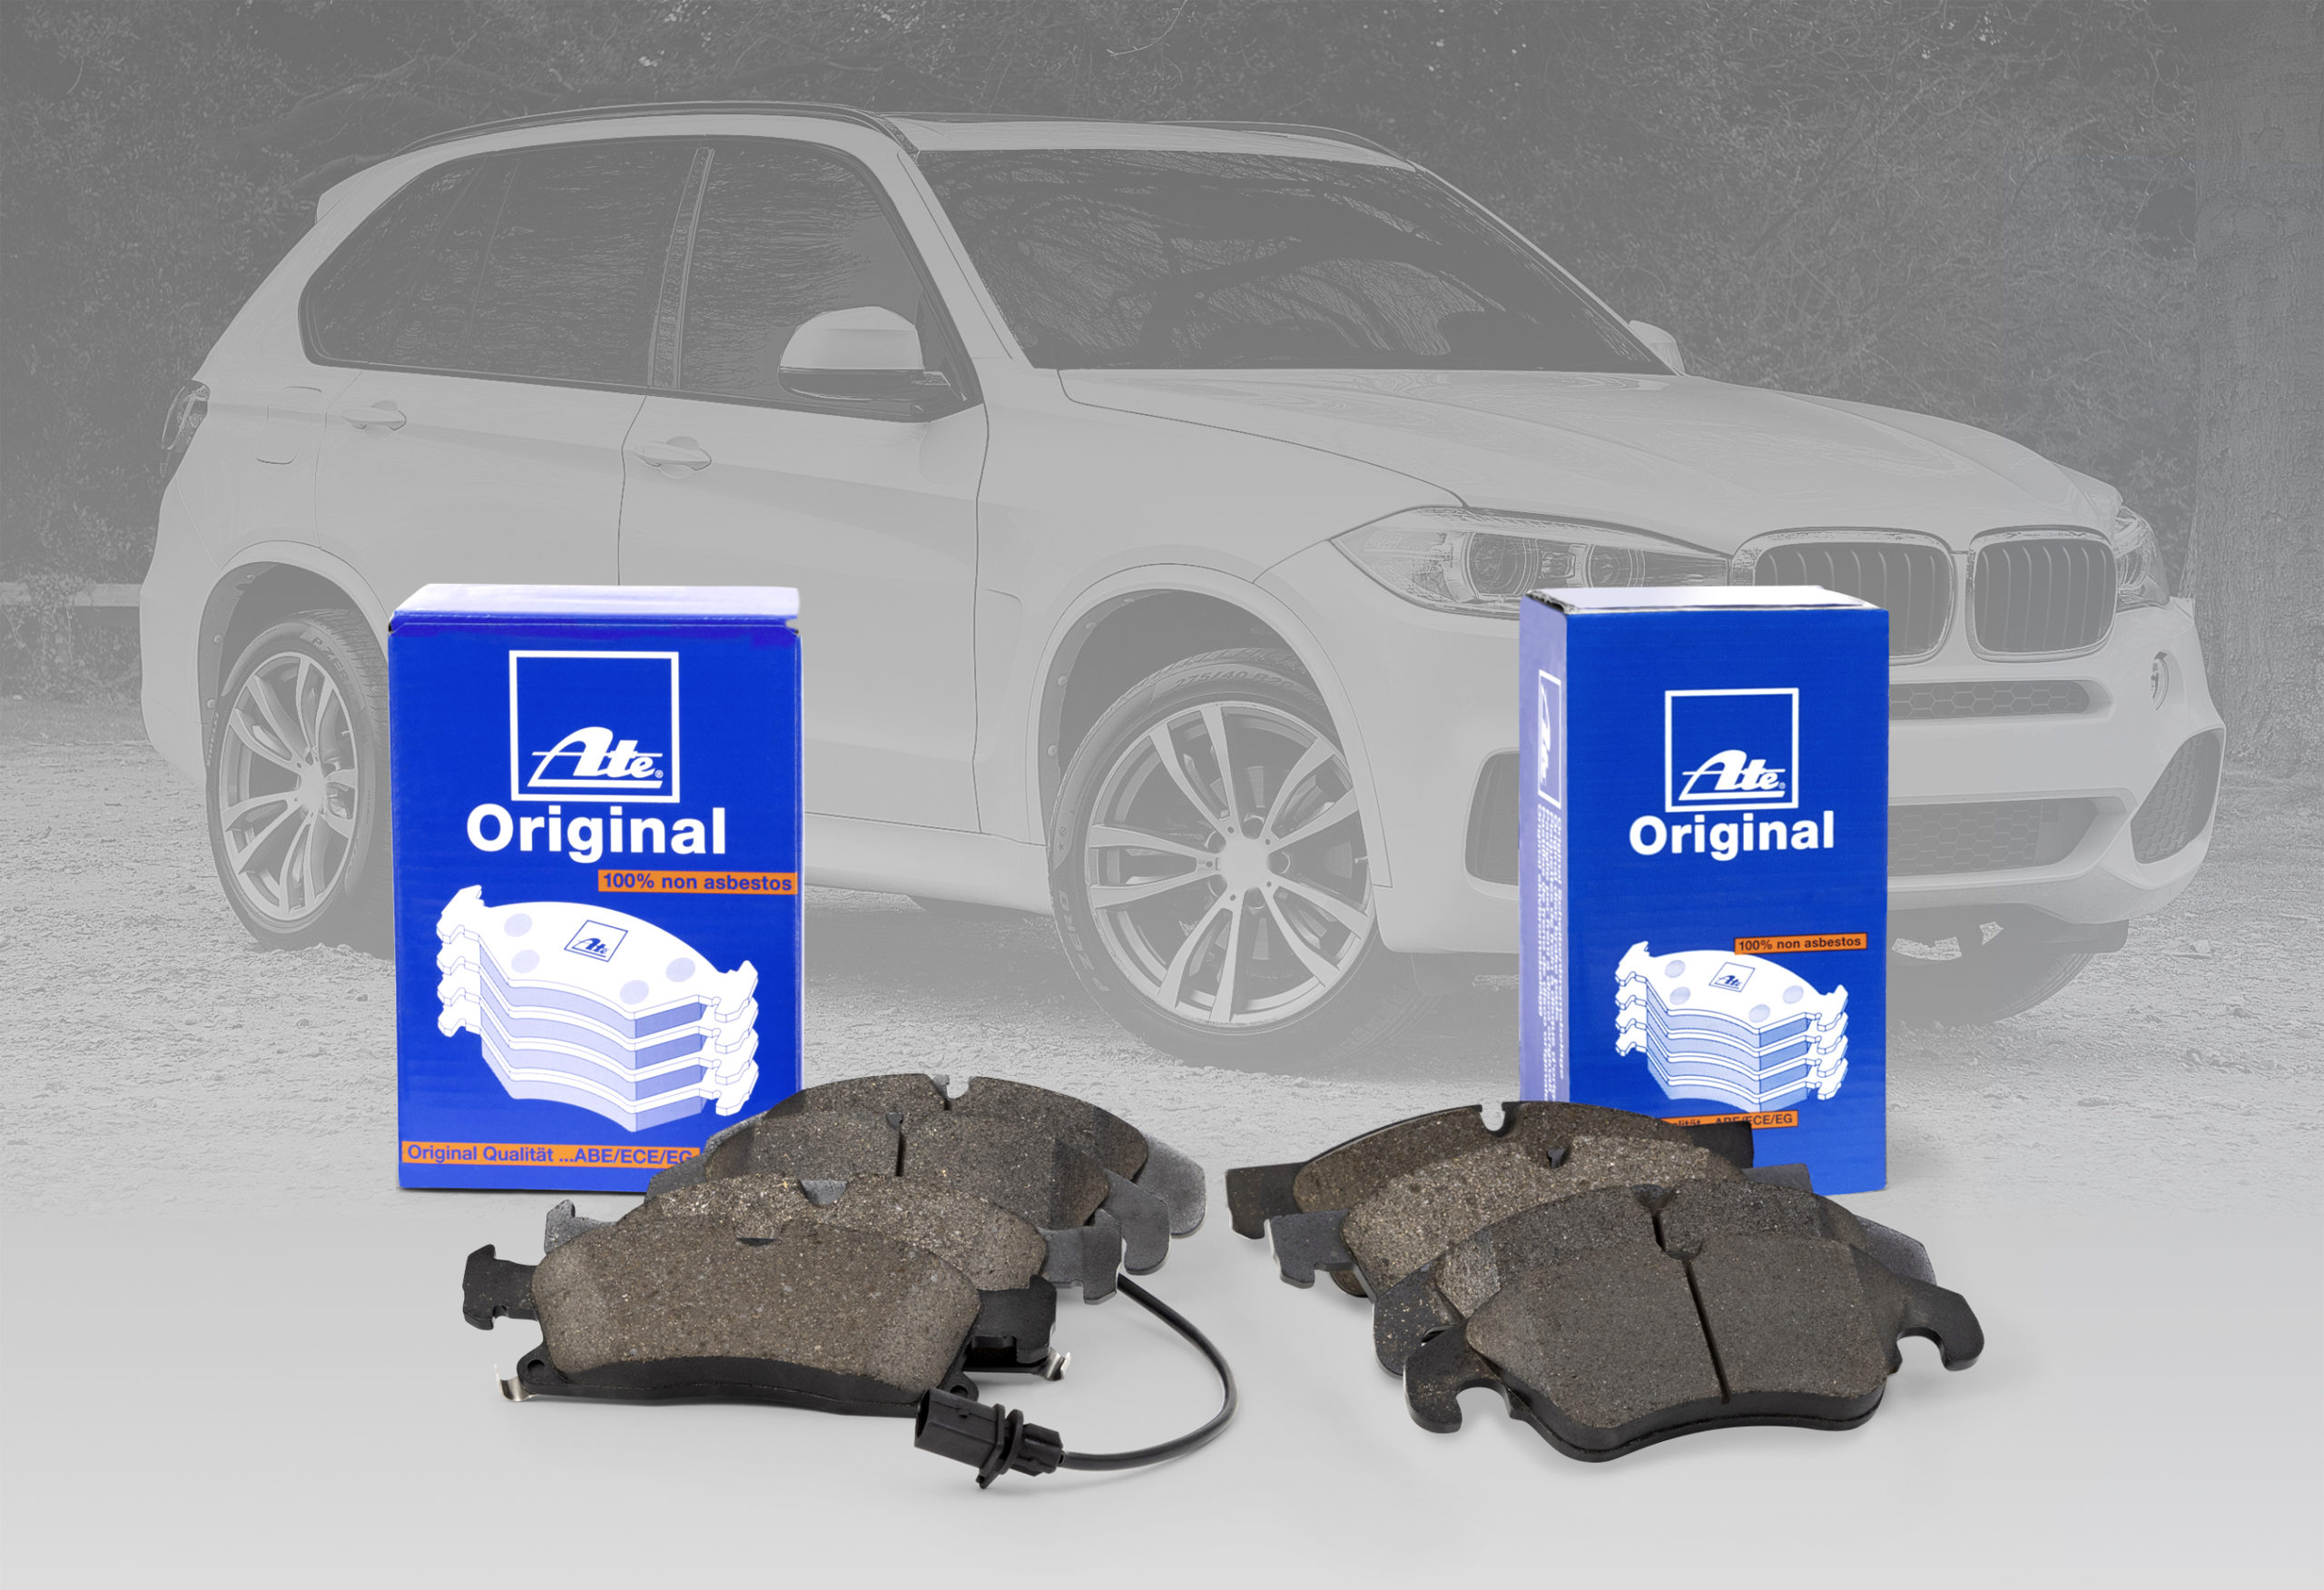 Continental, one of the world’s leading brake system manufacturers and suppliers, now offers expanded ATE Disc Brake Pad coverage for over 95% of European vehicles. 